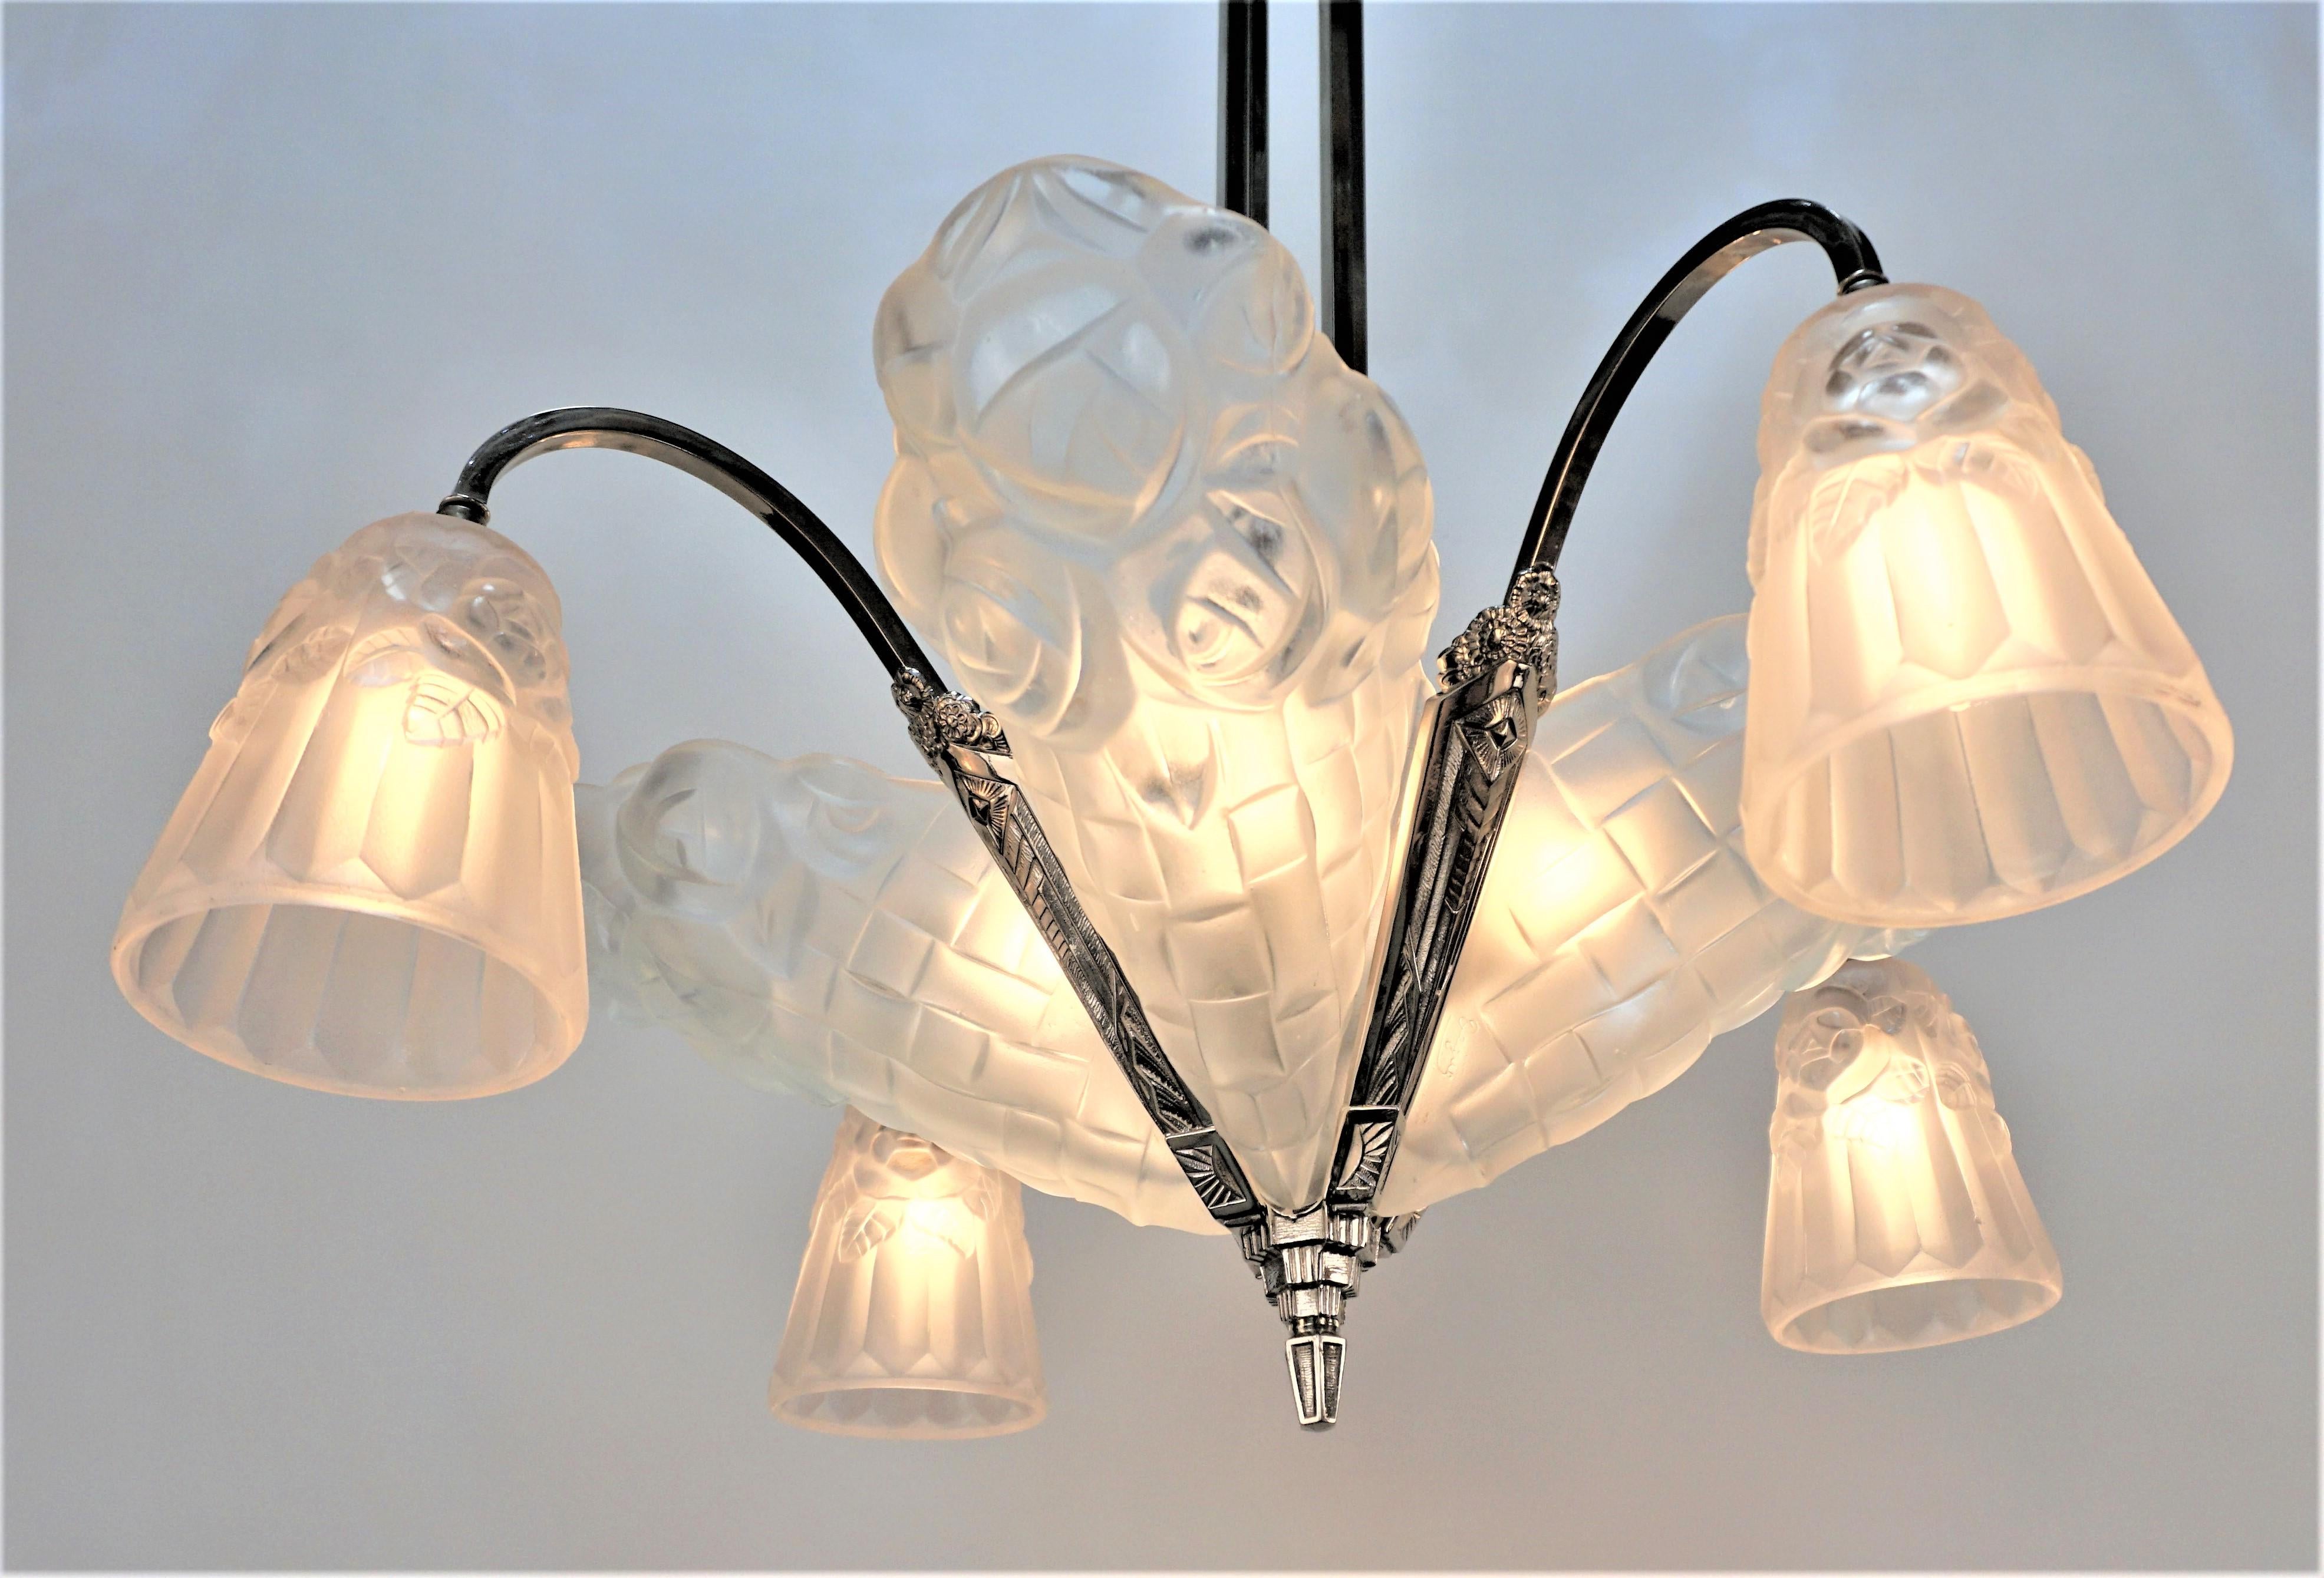 French 1930's clear frost glass art deco chandelier with four slip shades and four down lights. Frame is nickel on bronze with total of eight lights.
60watts max each light.